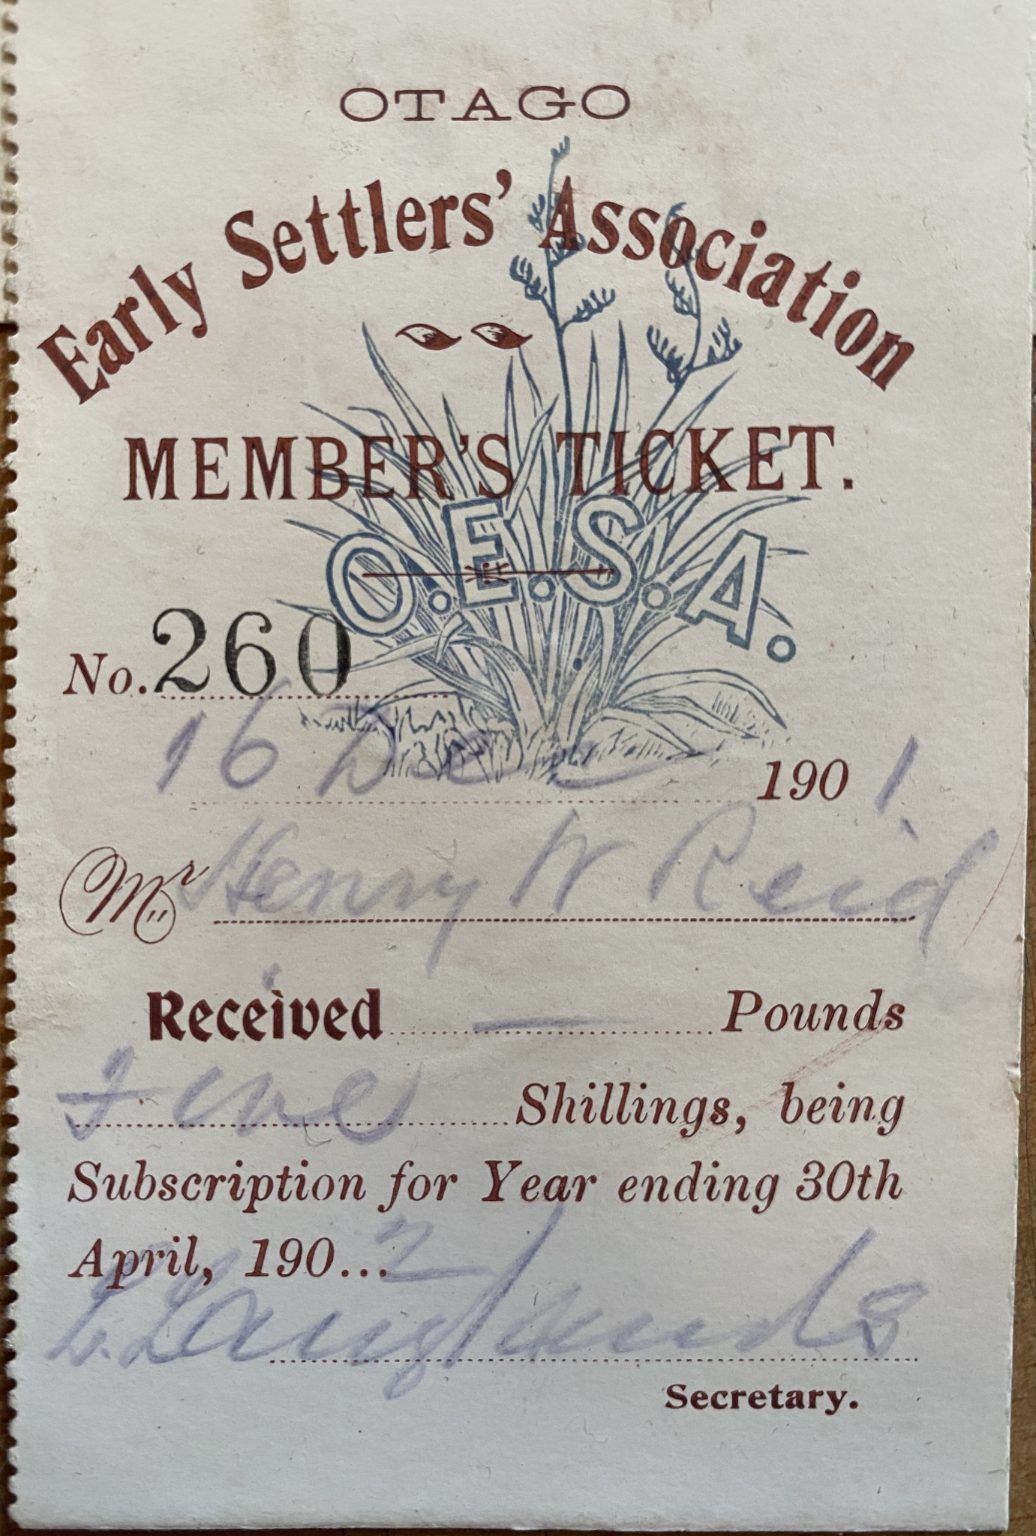 ANTIQUE TICKET: Otago Early Settlers Association 1901